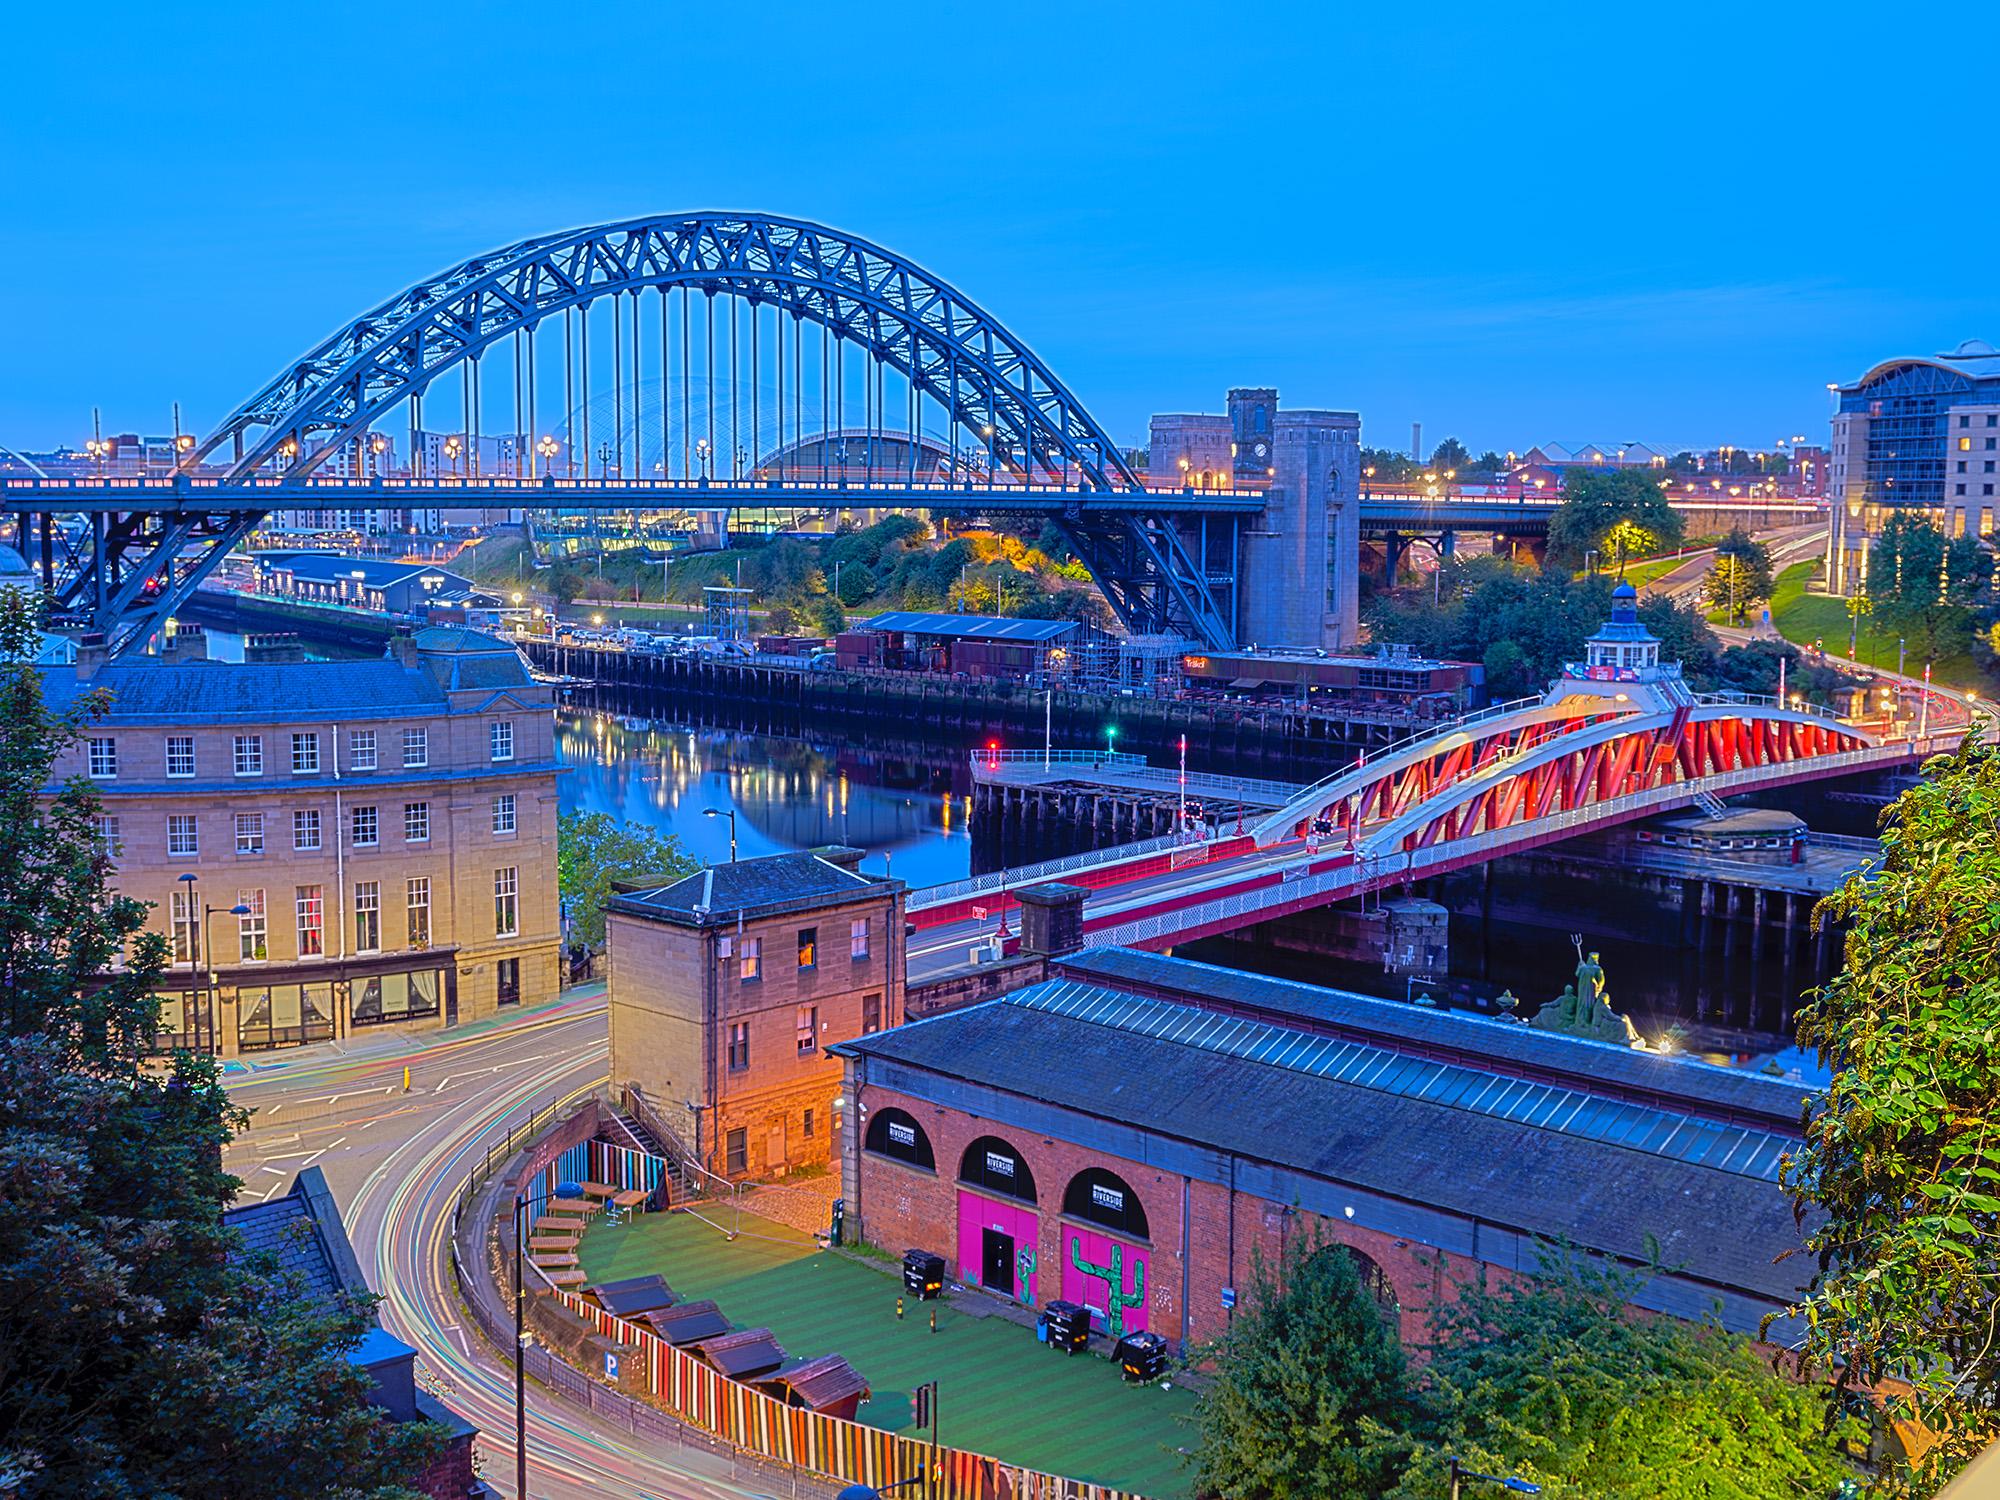 A garish, HDR image of the Tyne Bridges in Newcastle
